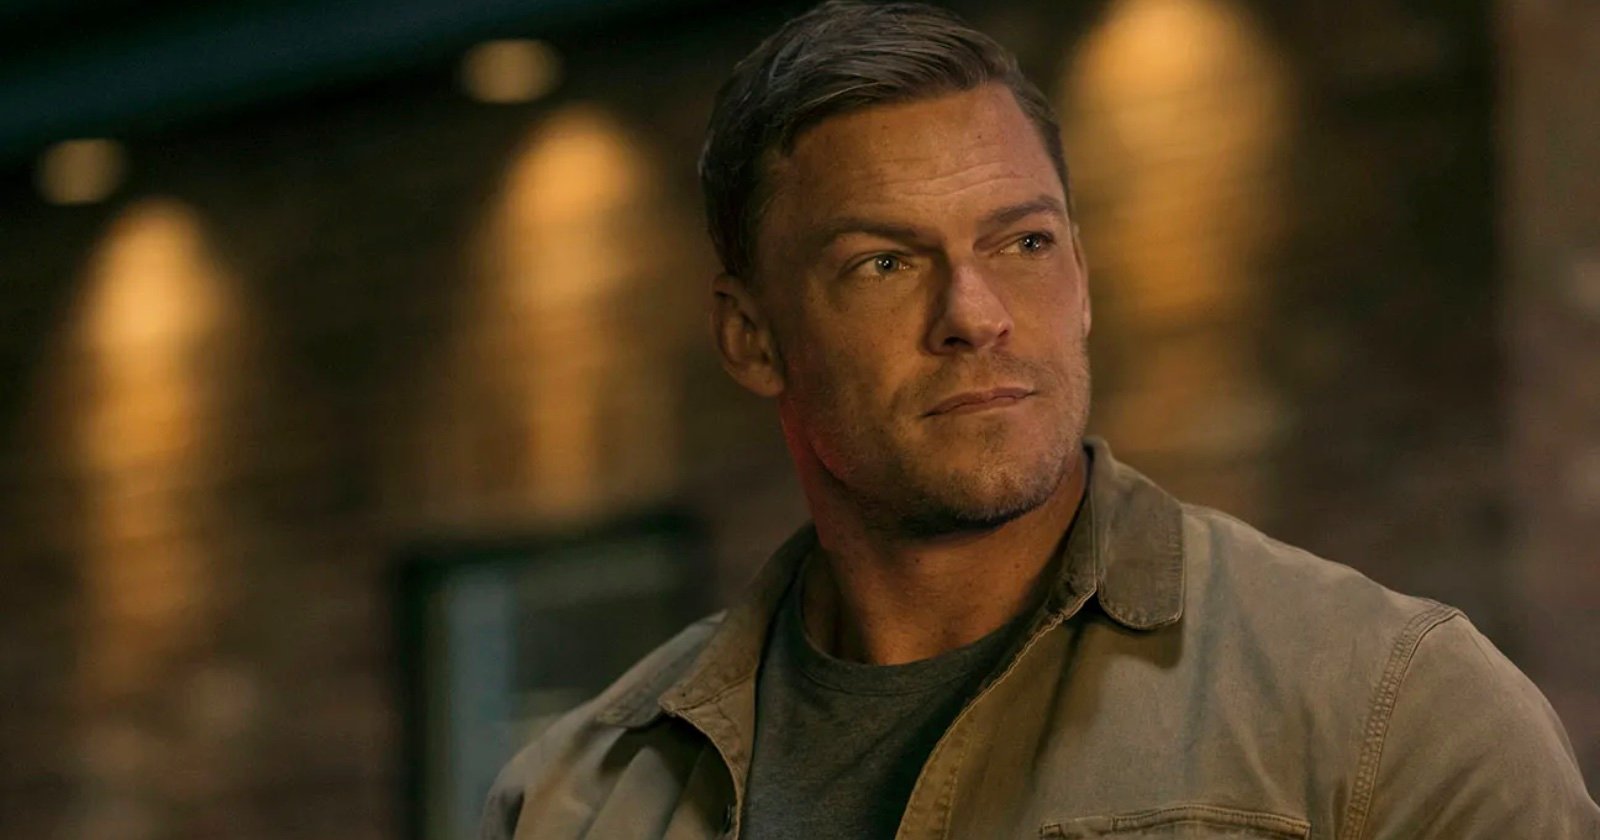 Reacher Star Alan Ritchson Was Sexually Assaulted by Very Famous Photographer